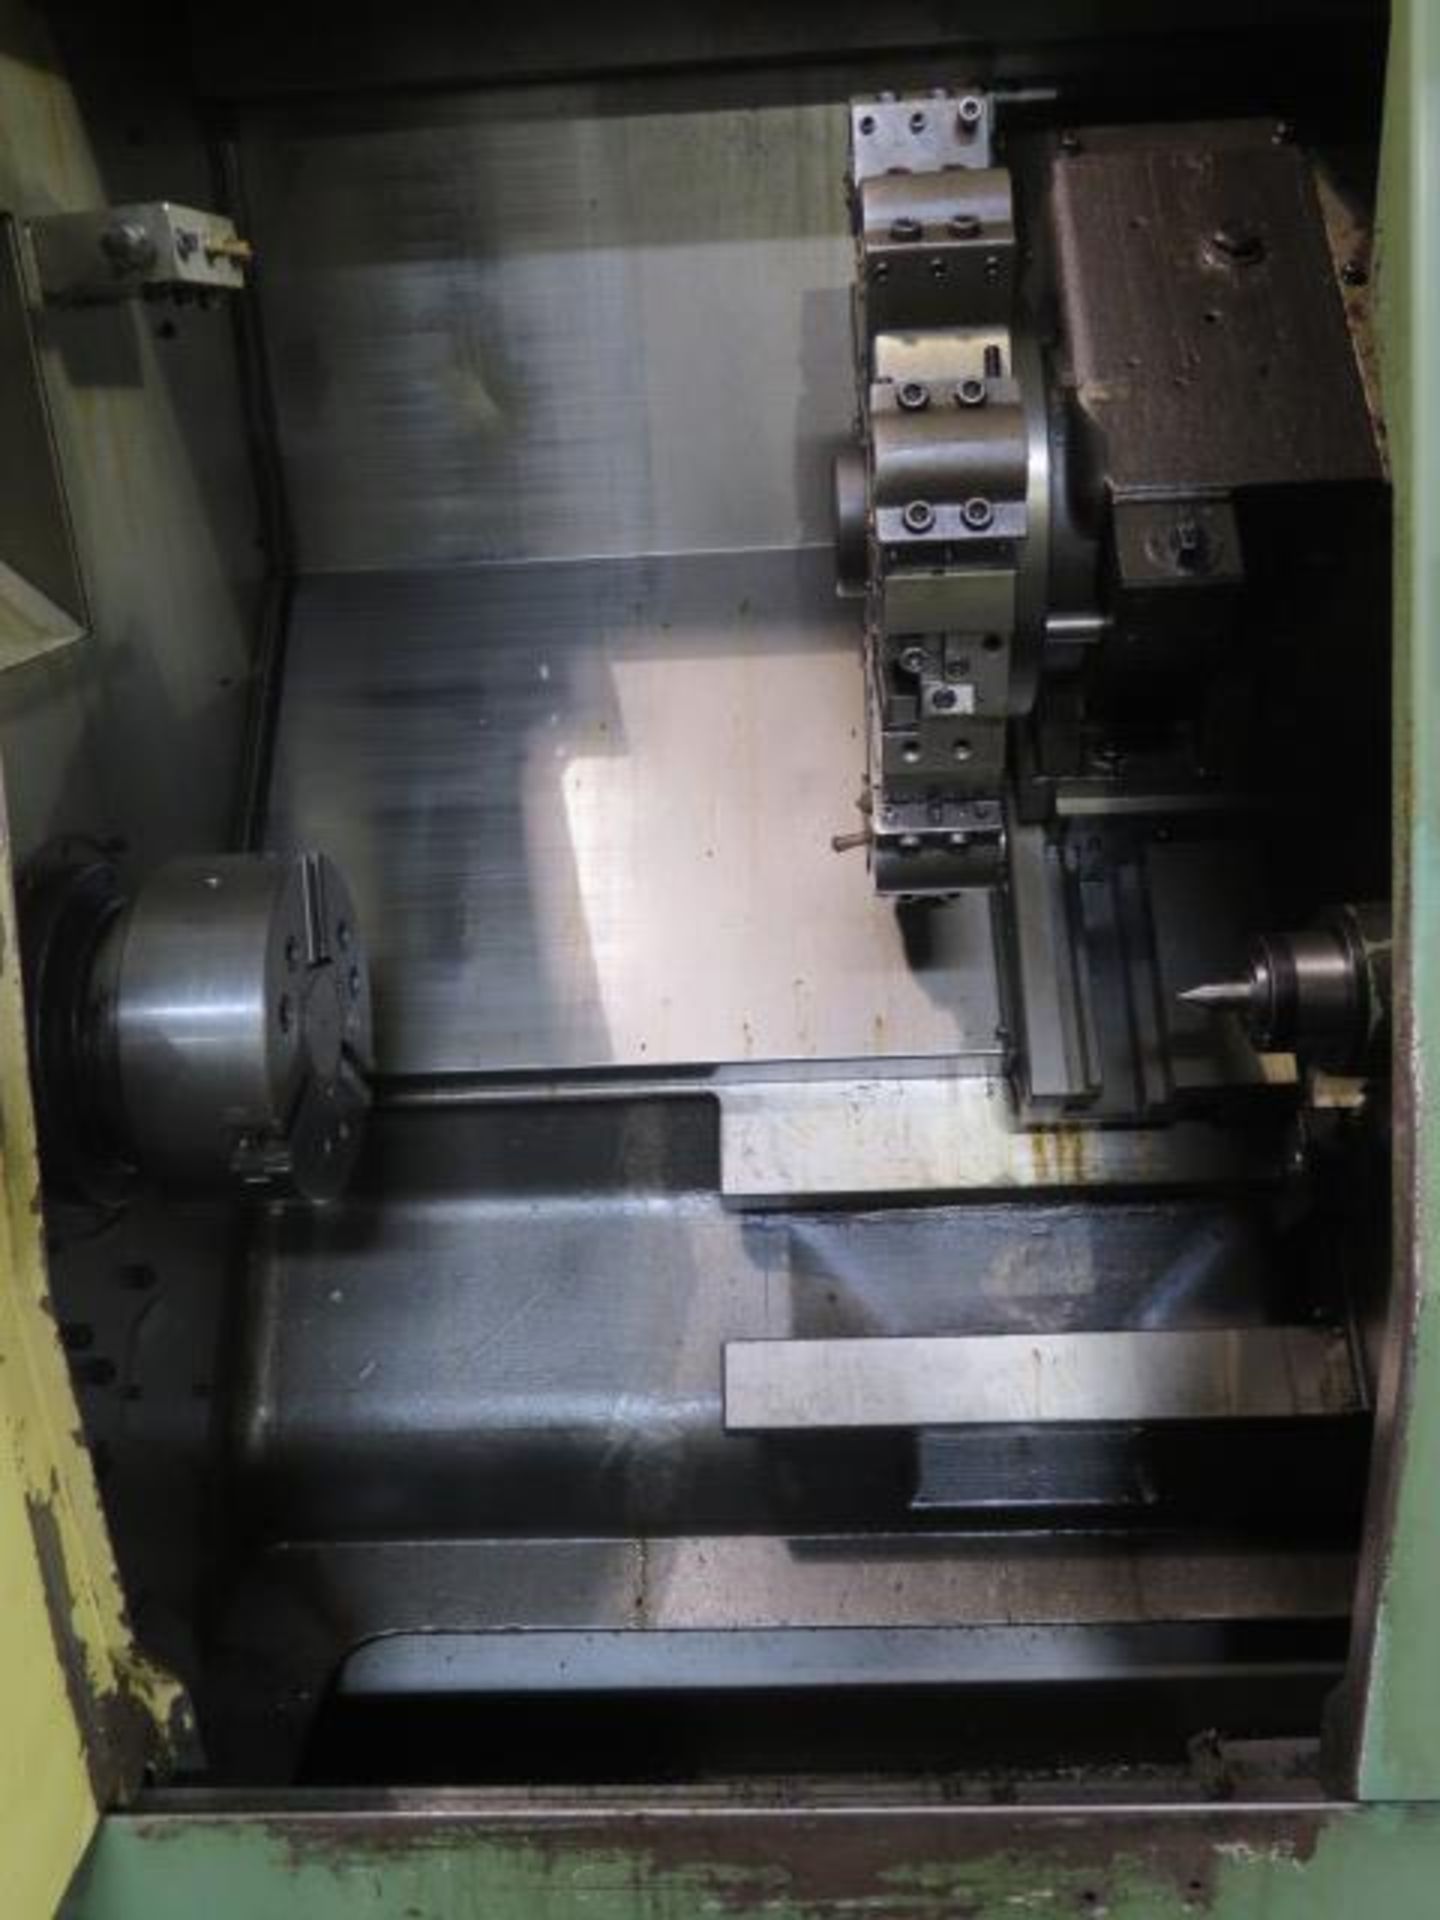 Mori Seiki SL-25 CNC Turning Center s/n 3178 w/ Yasnac Controls, 10-Station, Hydraulic, SOLD AS IS - Image 4 of 11